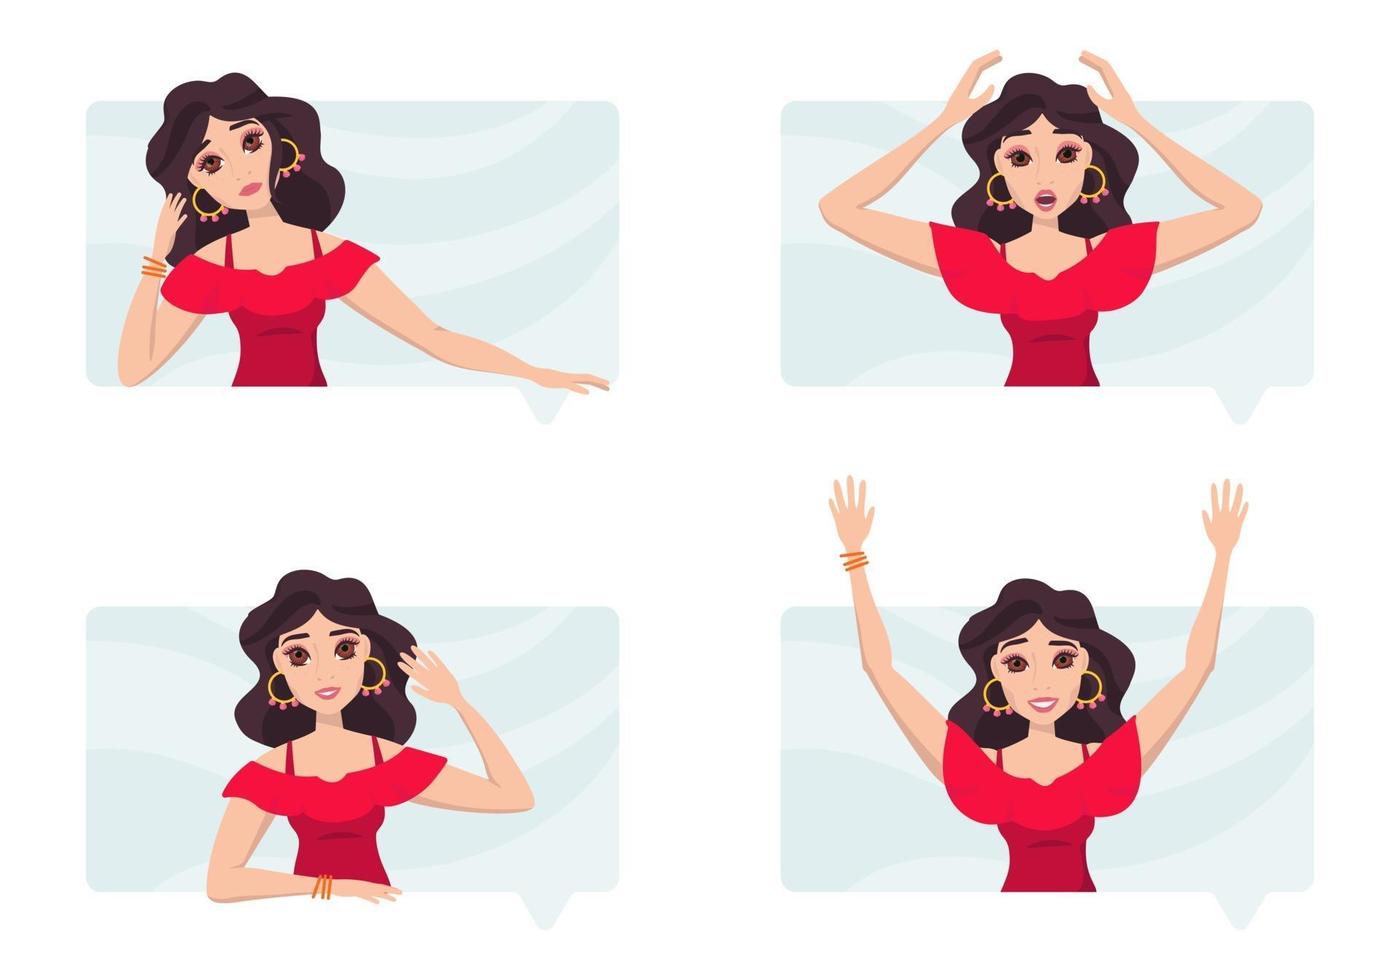 Concept art of womens messages. Expression of different emotions in online chat vector